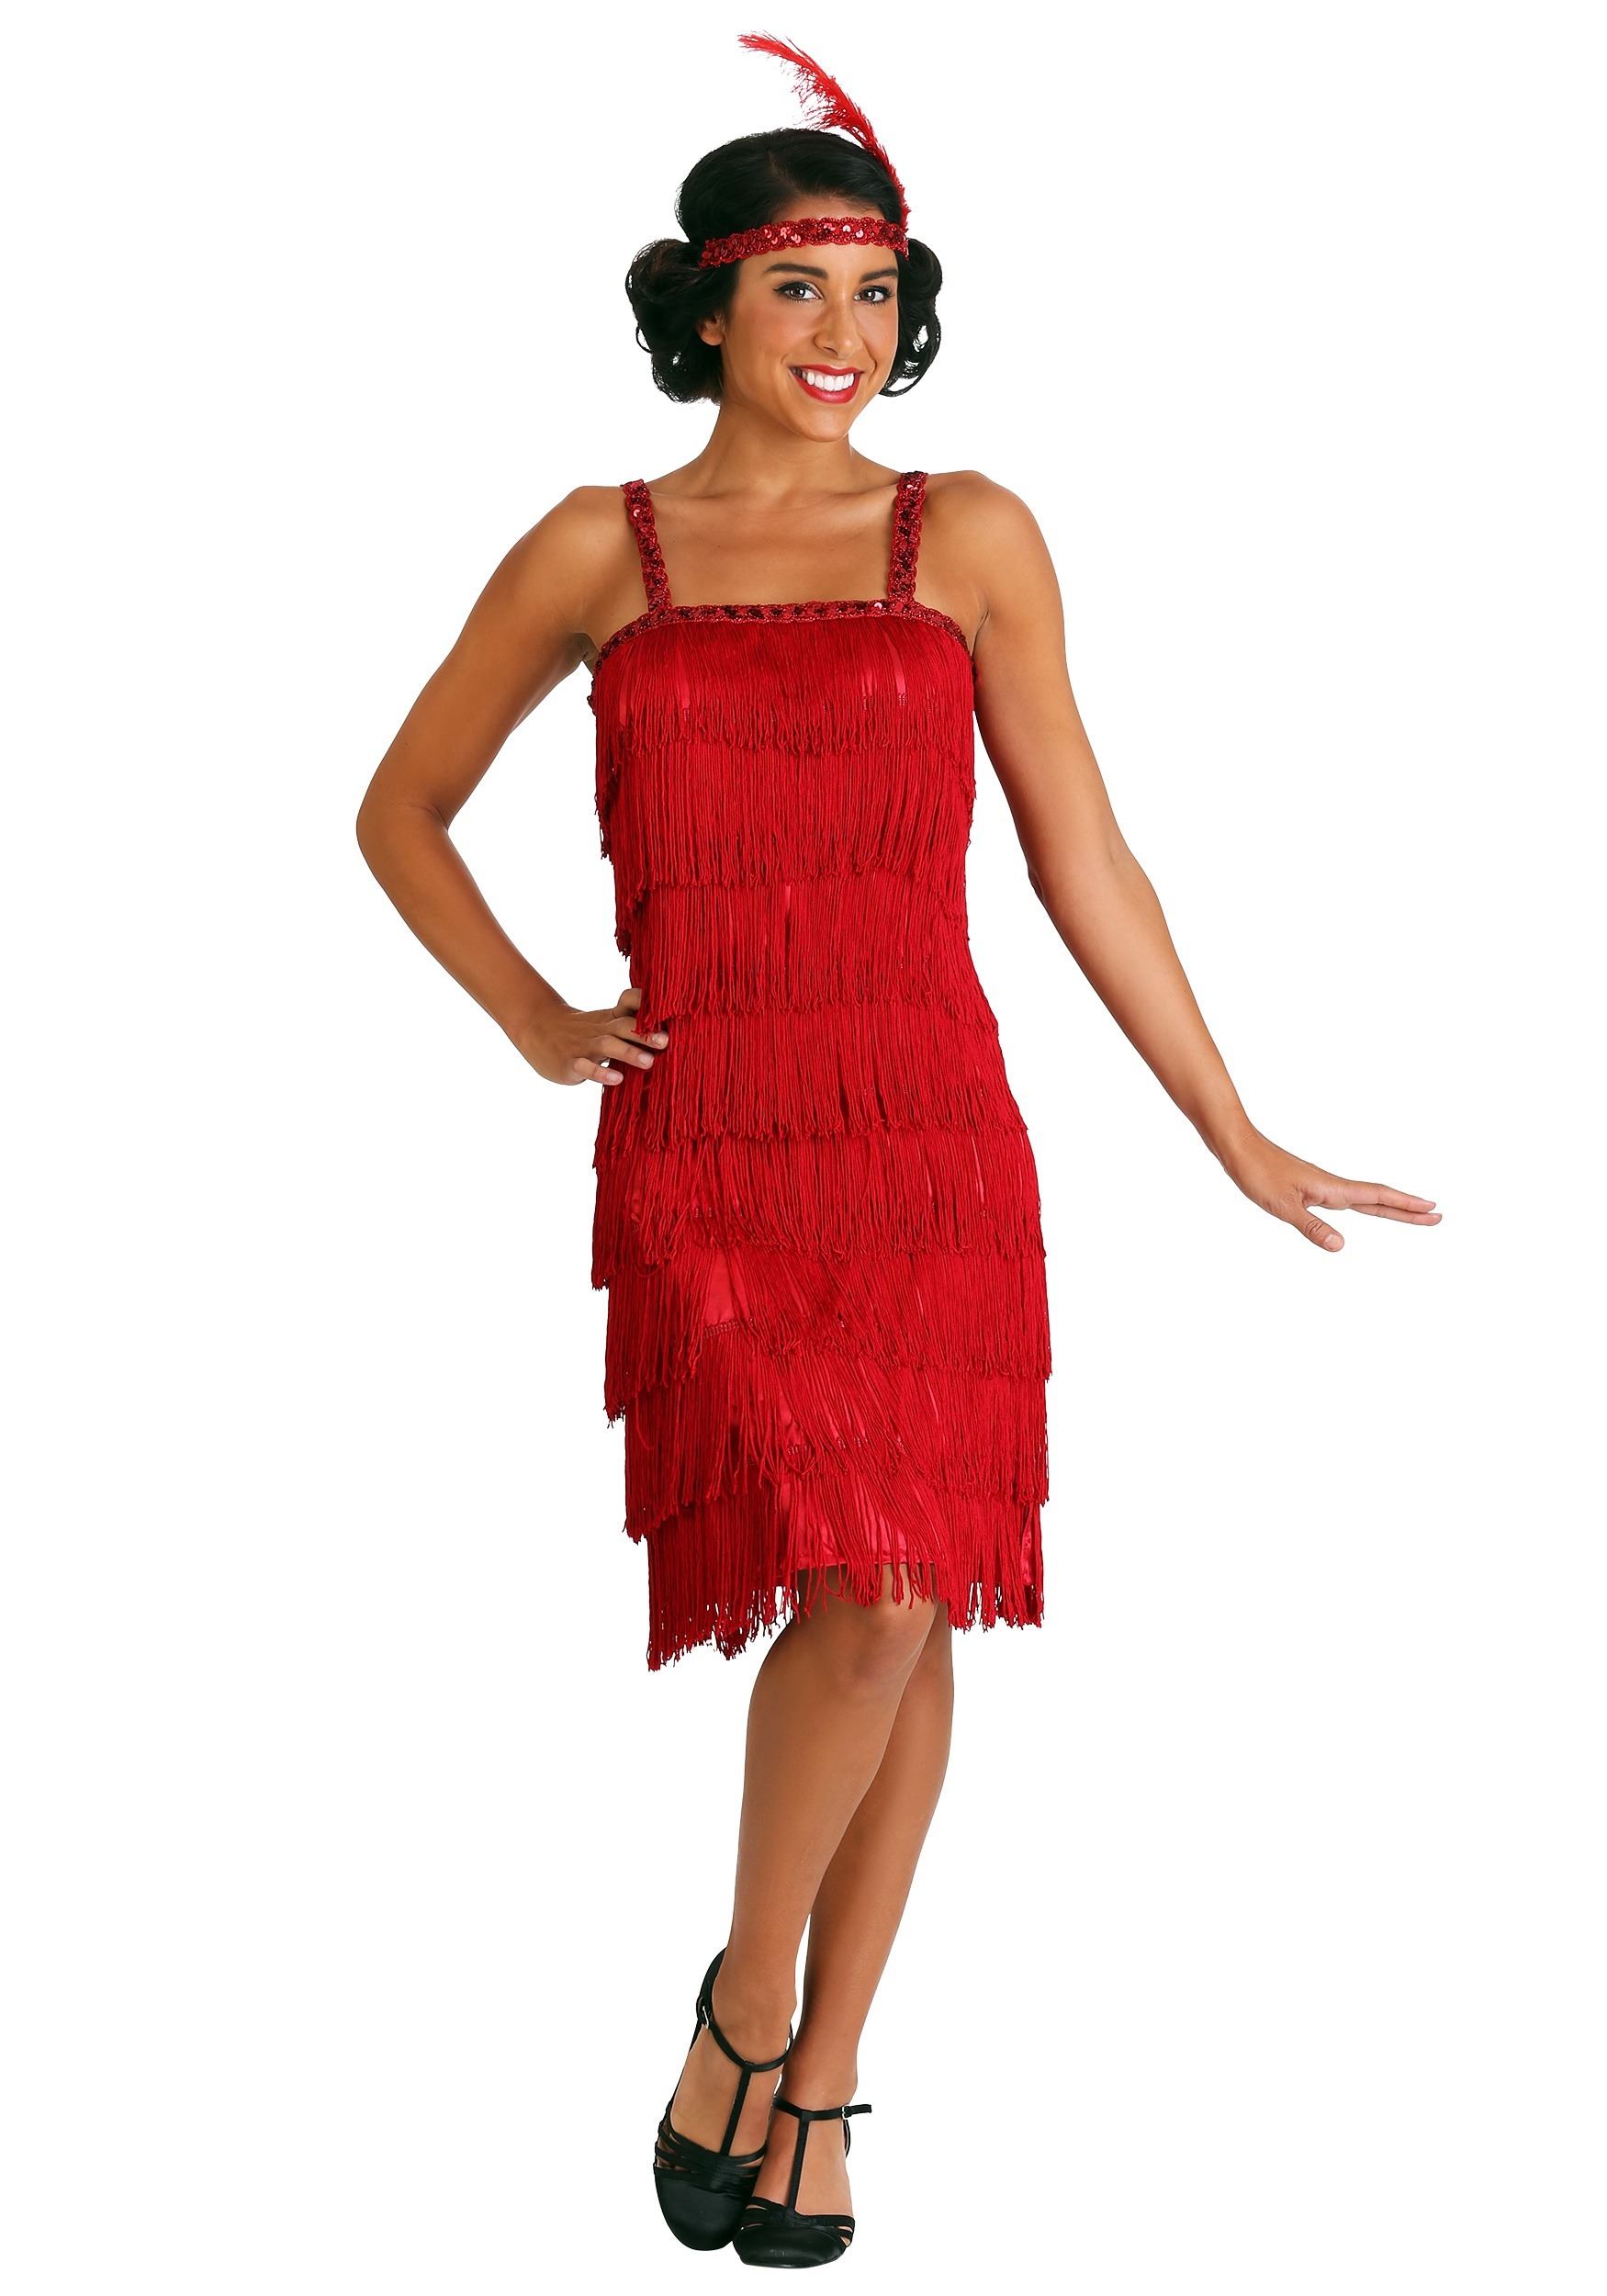 Photos - Fancy Dress FUN Costumes Red Fringe Florence Flapper Costume Red FUN2000RD